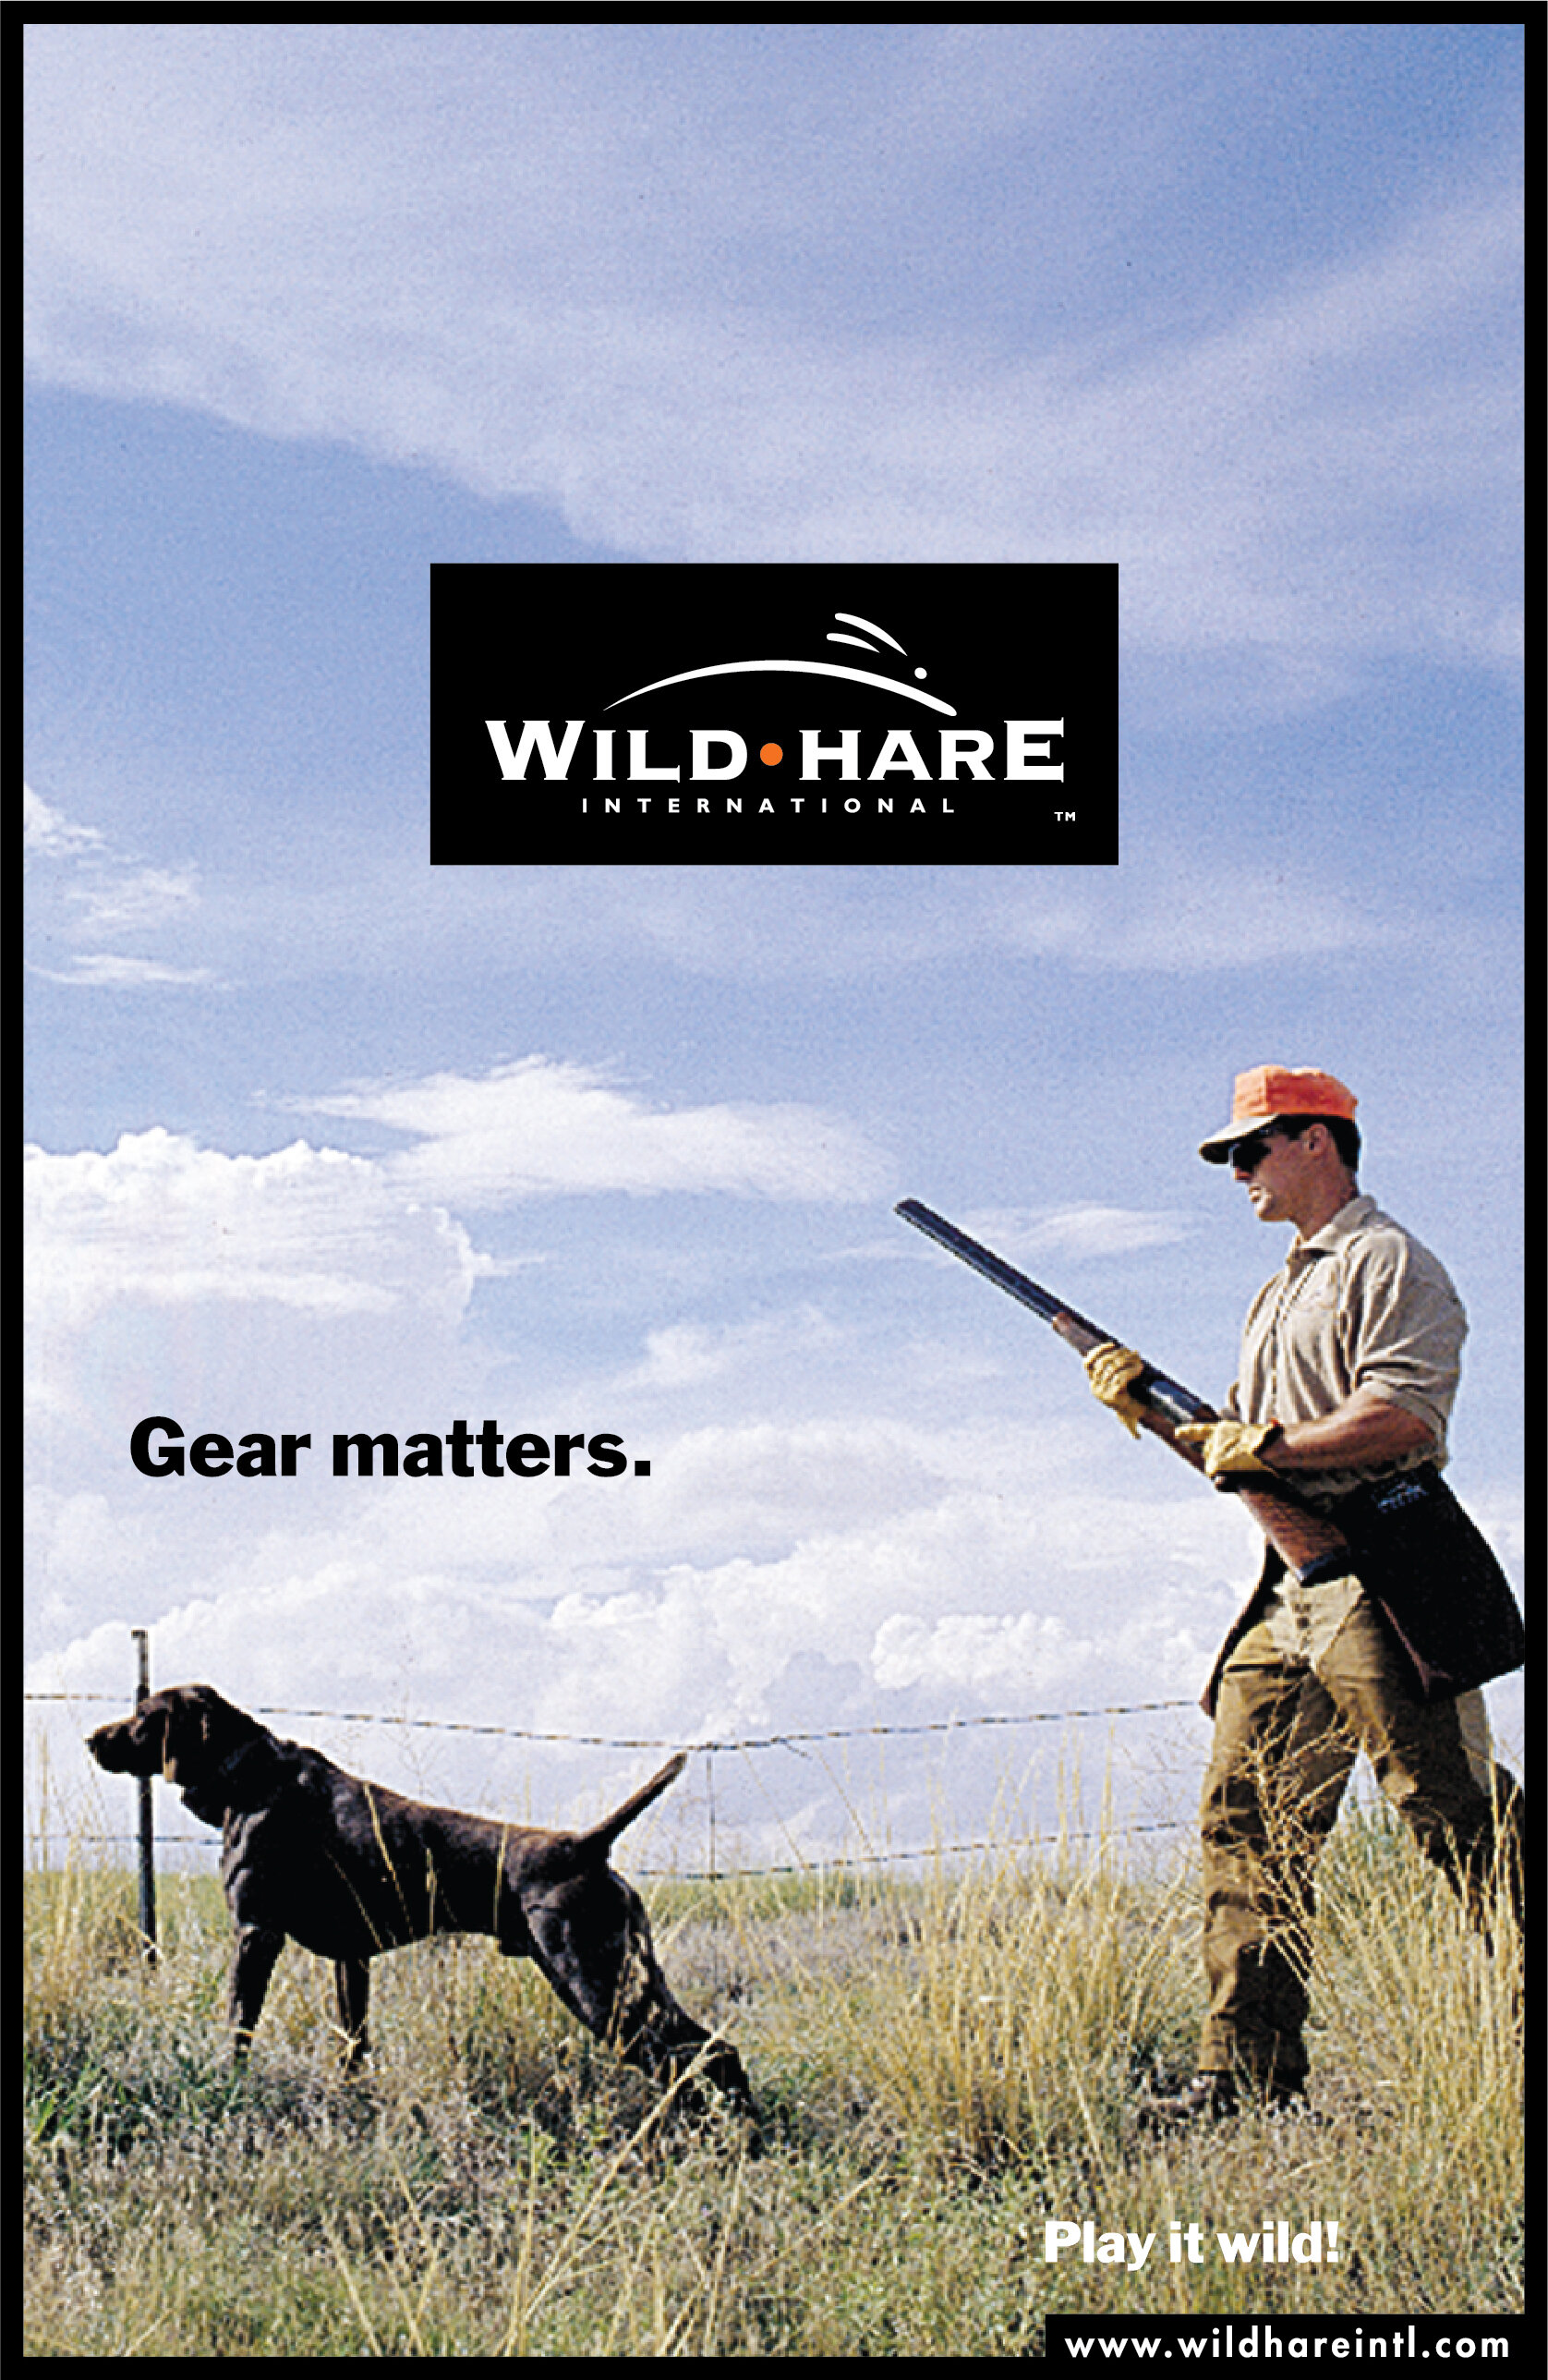  Wild•Hare International product catalog cover  Design, branding and creative direction by Chuck Mitchell  Photograph by Jack Kenner 